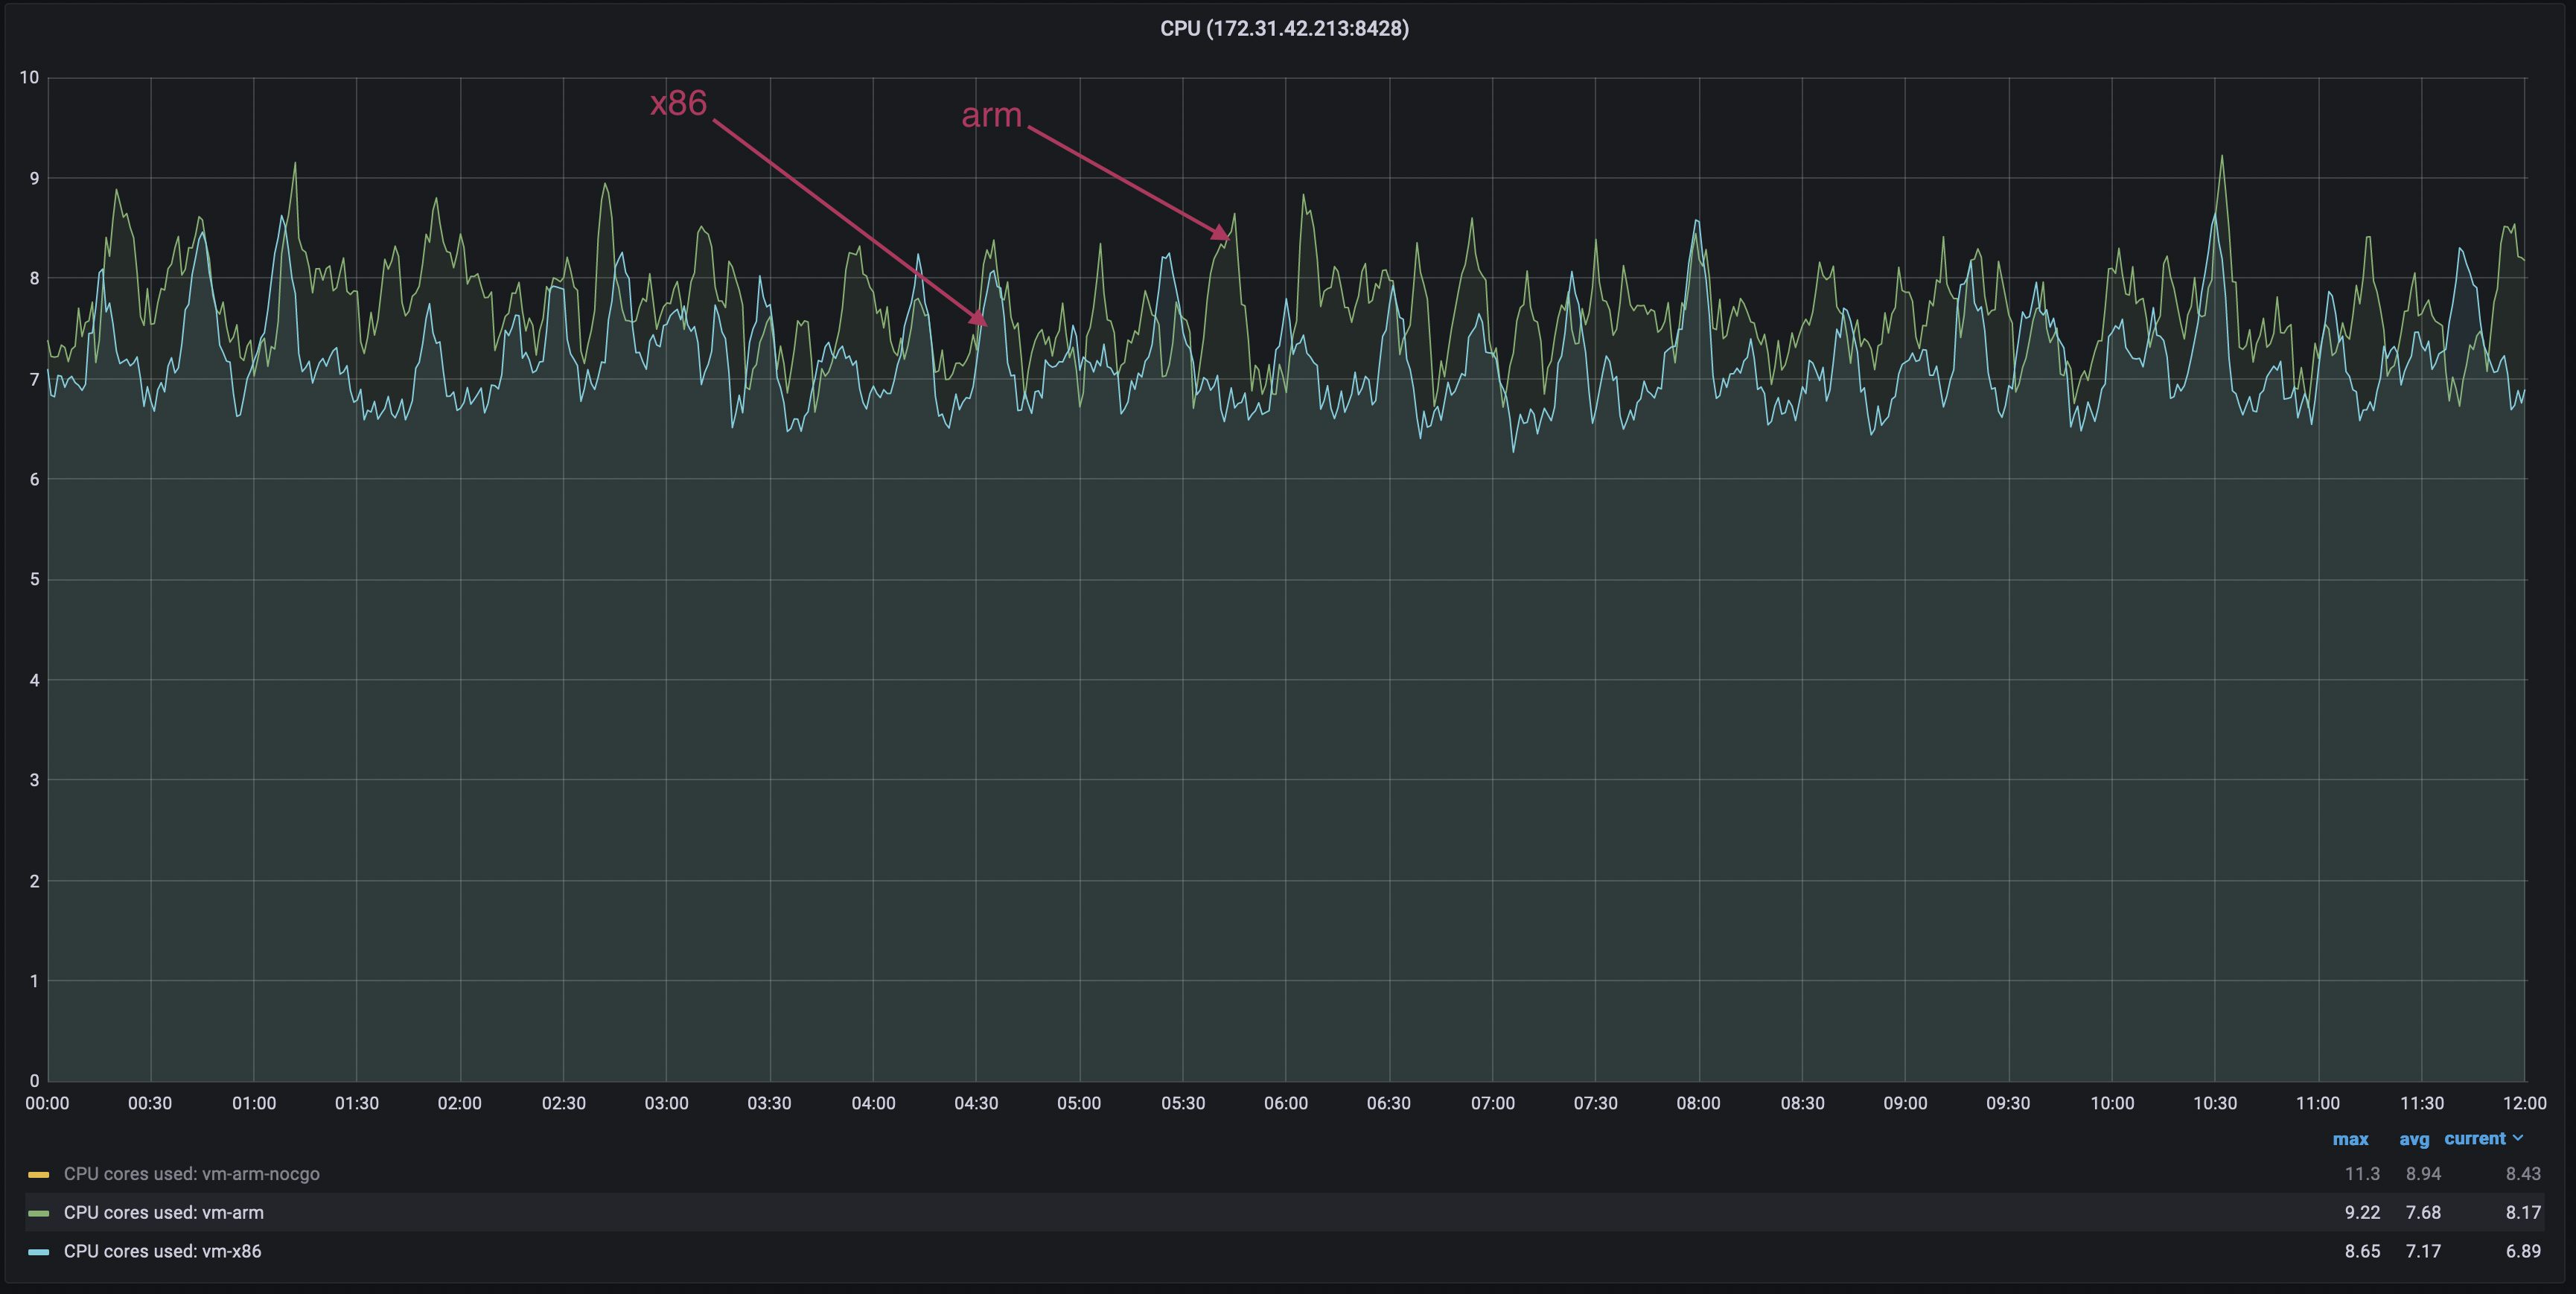 CPU usage by VictoriaMetrics after optimizations